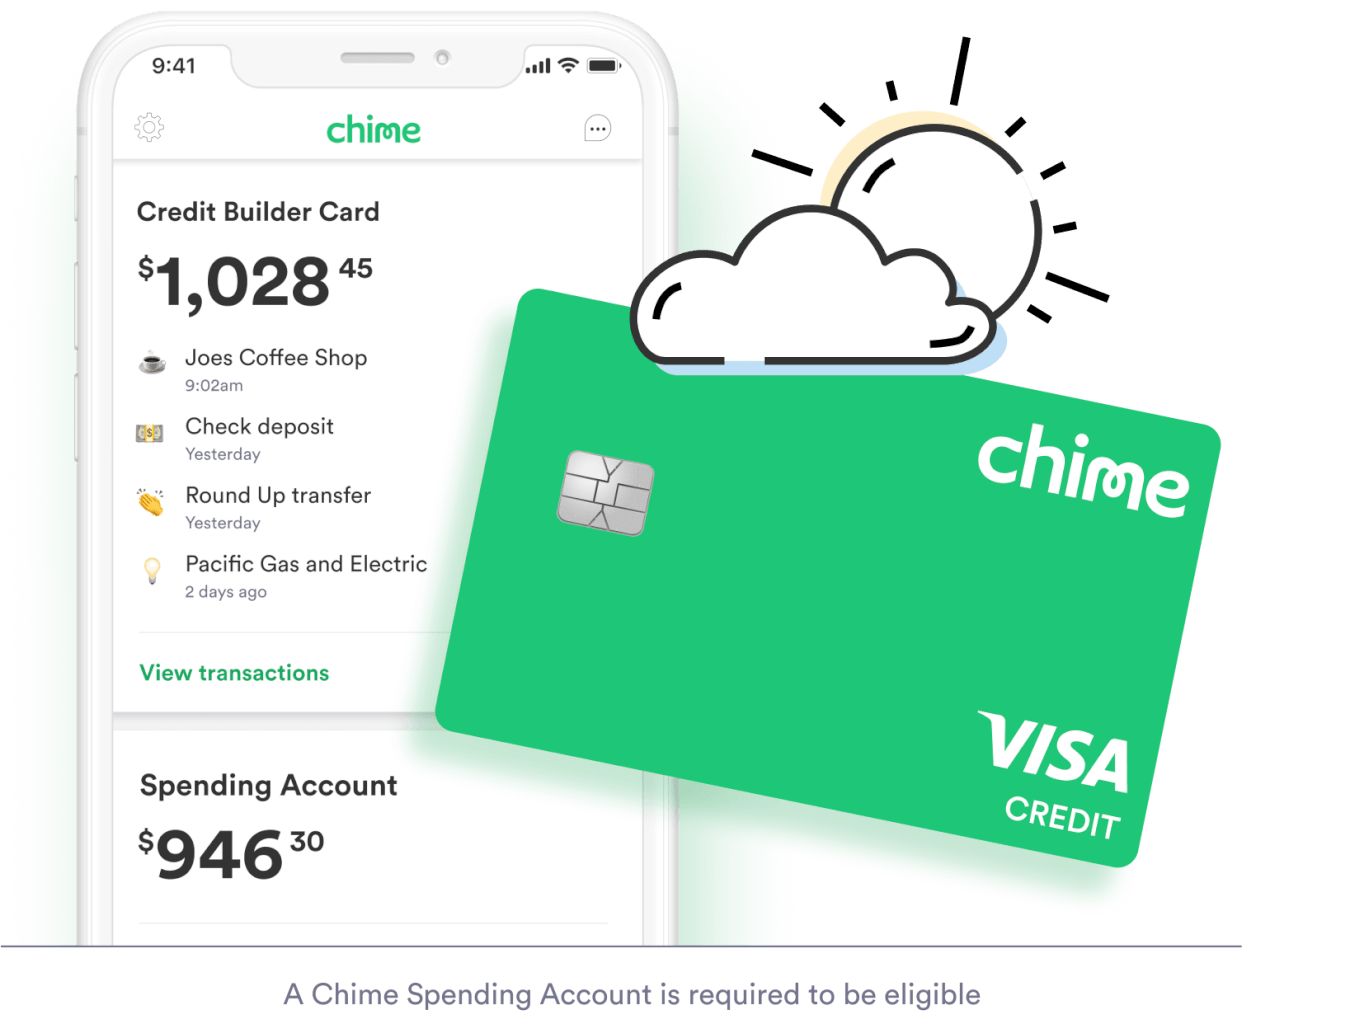 How Does Chime Card Work